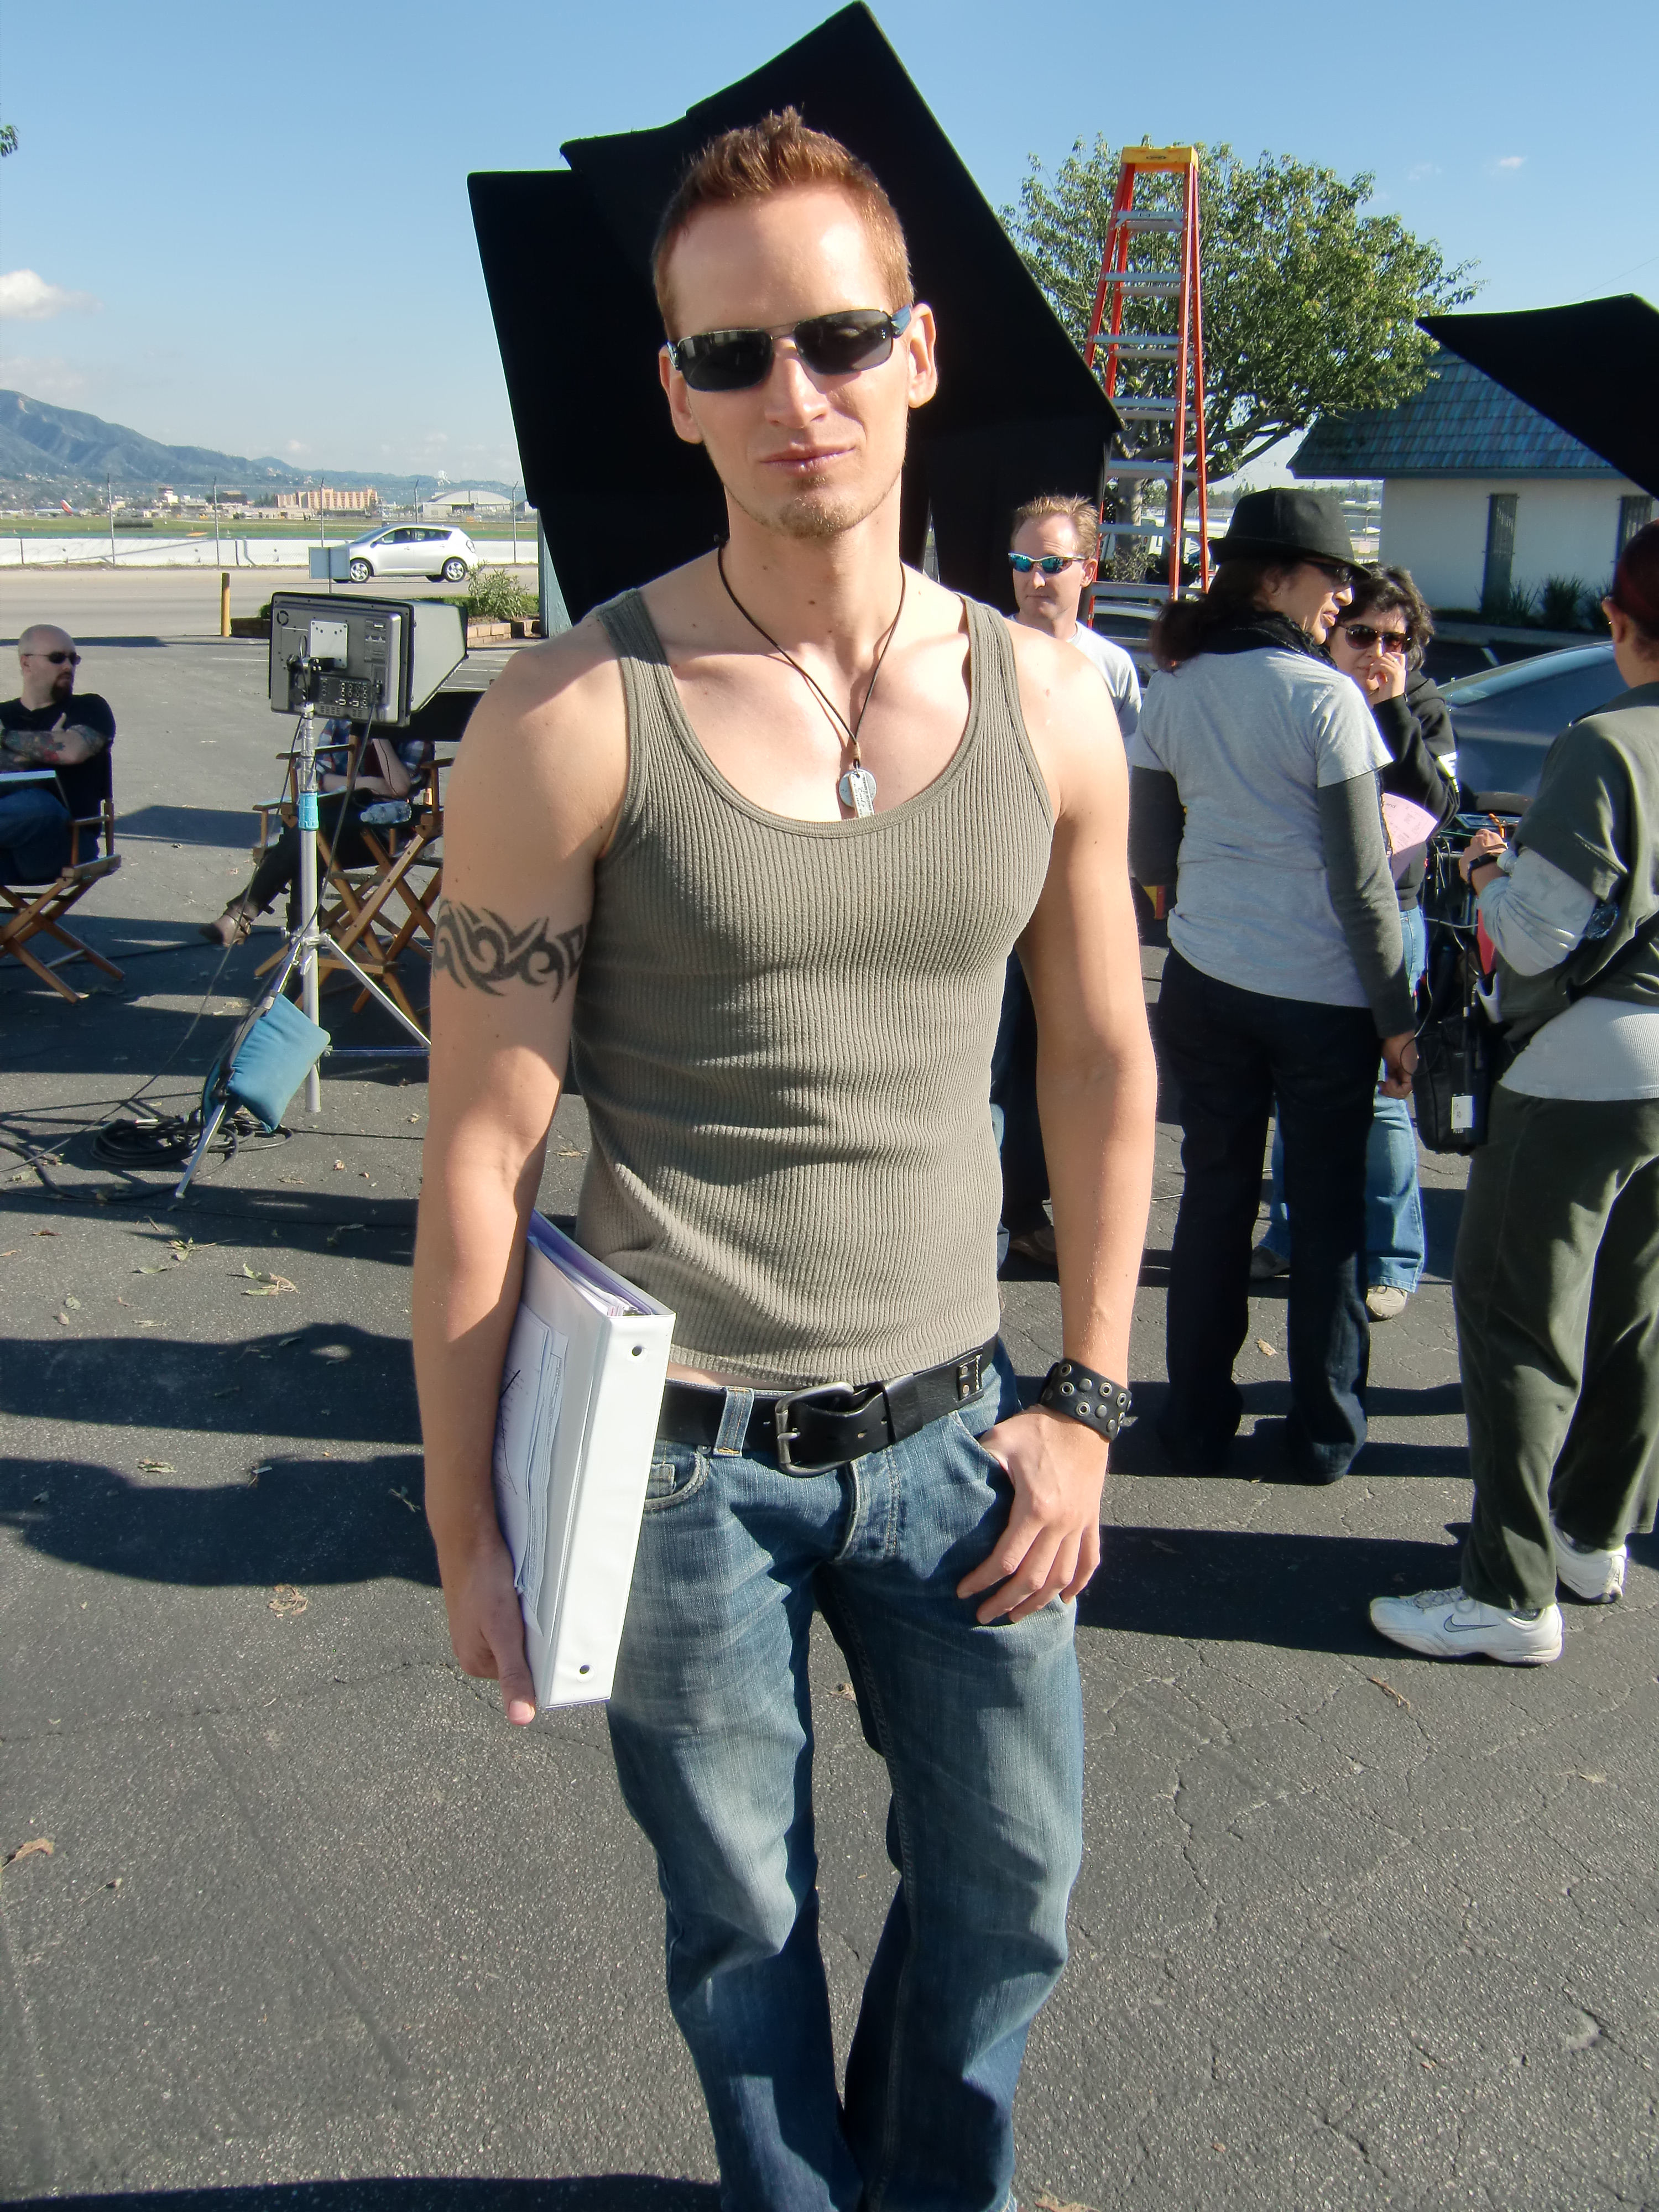 Director Casper Andreas on the set of 